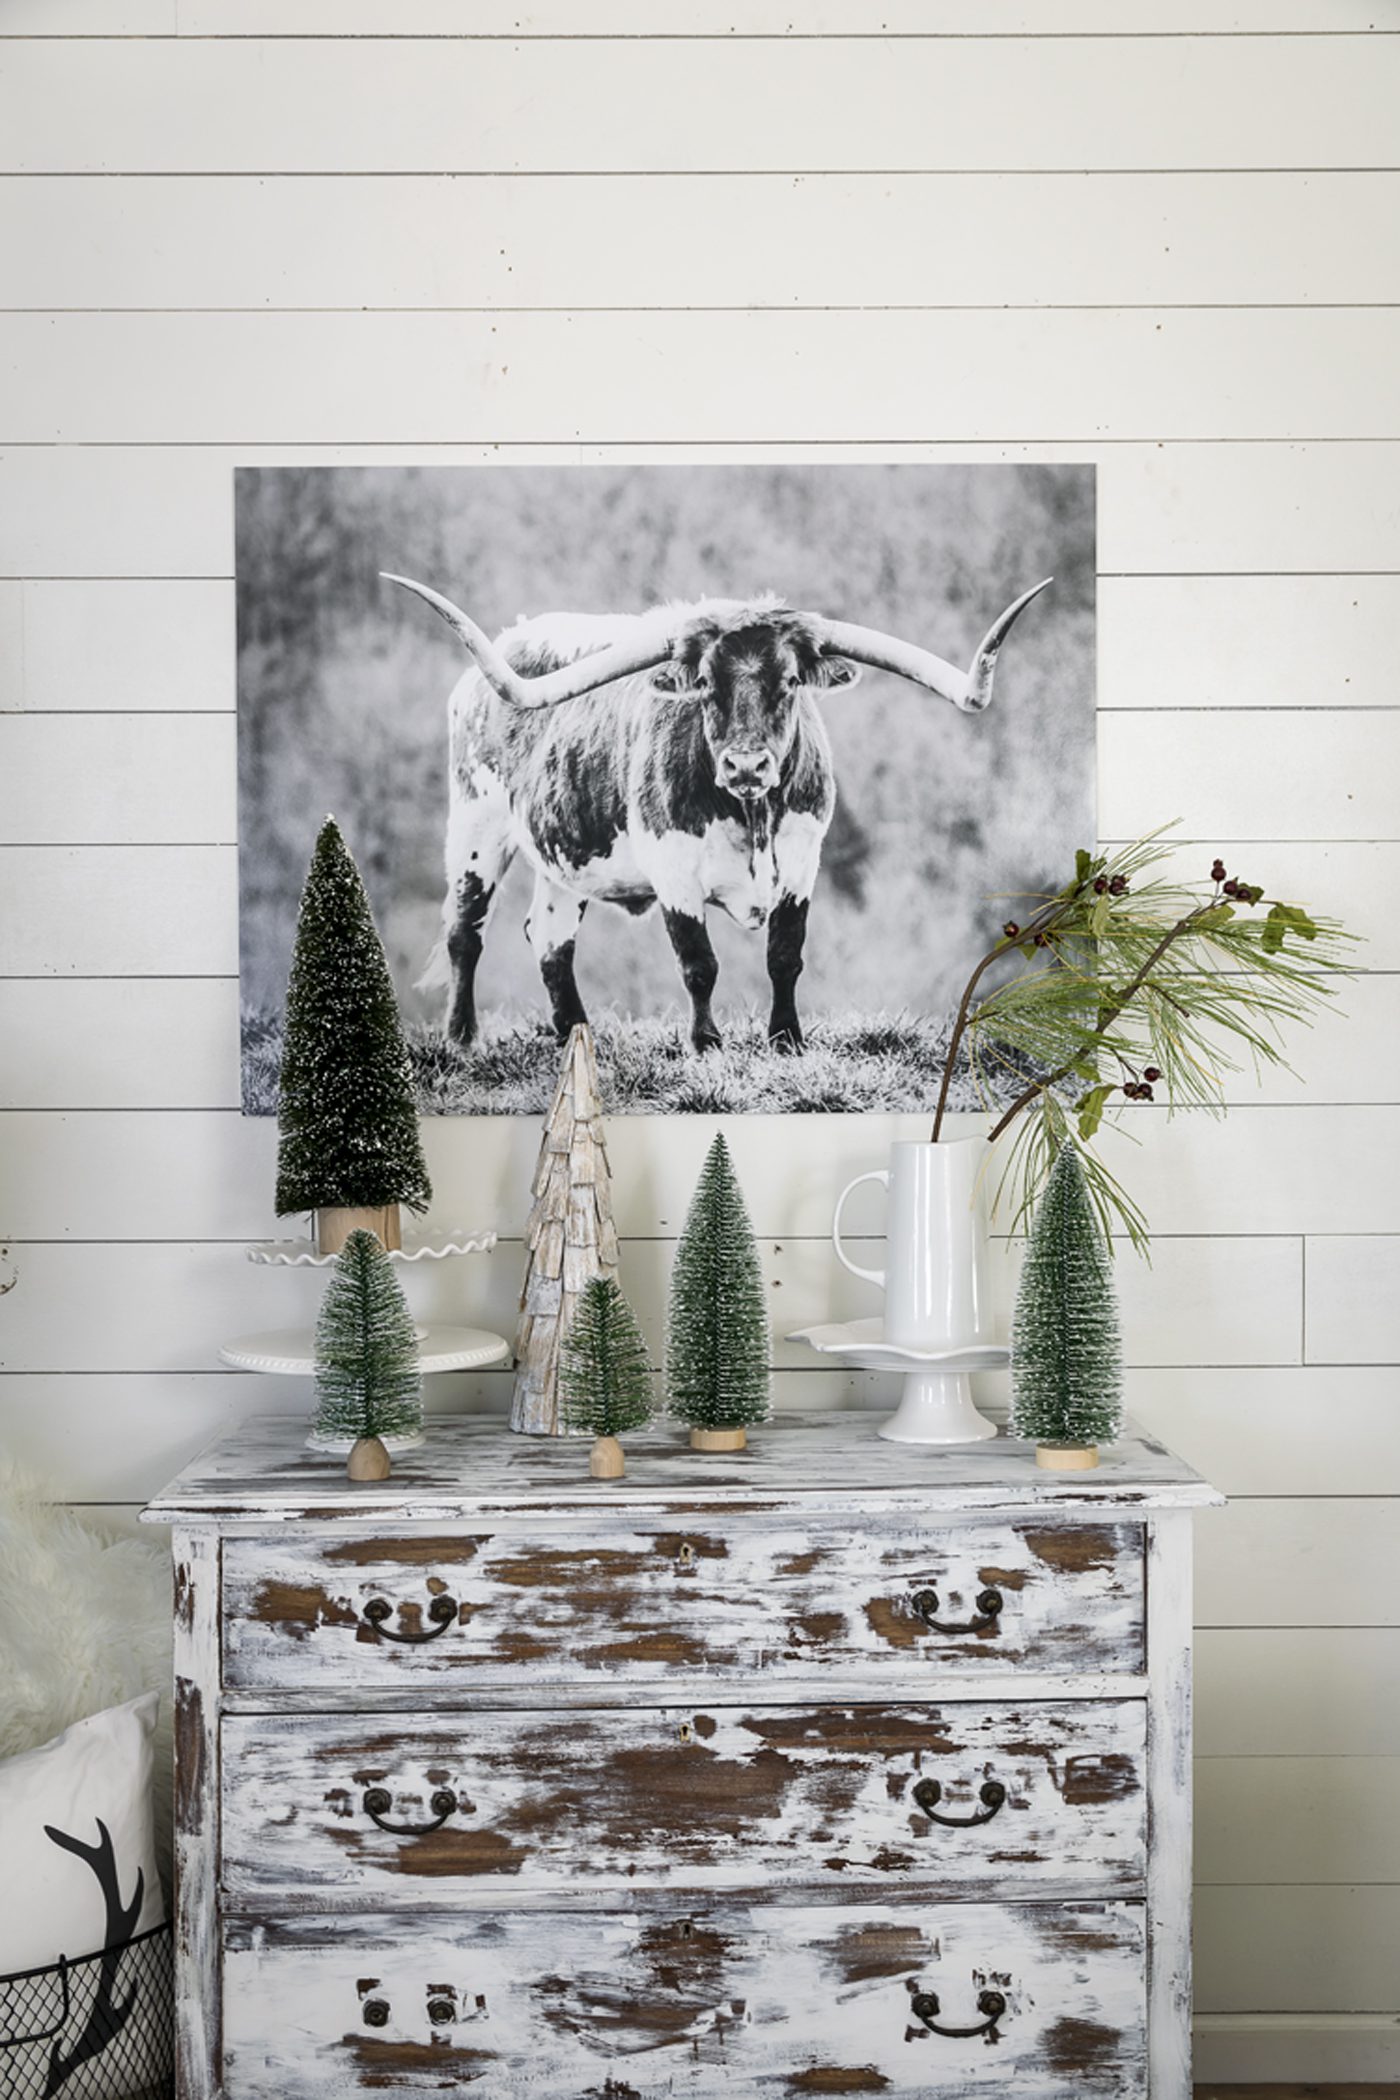 Plain mini pine trees on top of a rustic, faded white dresser.